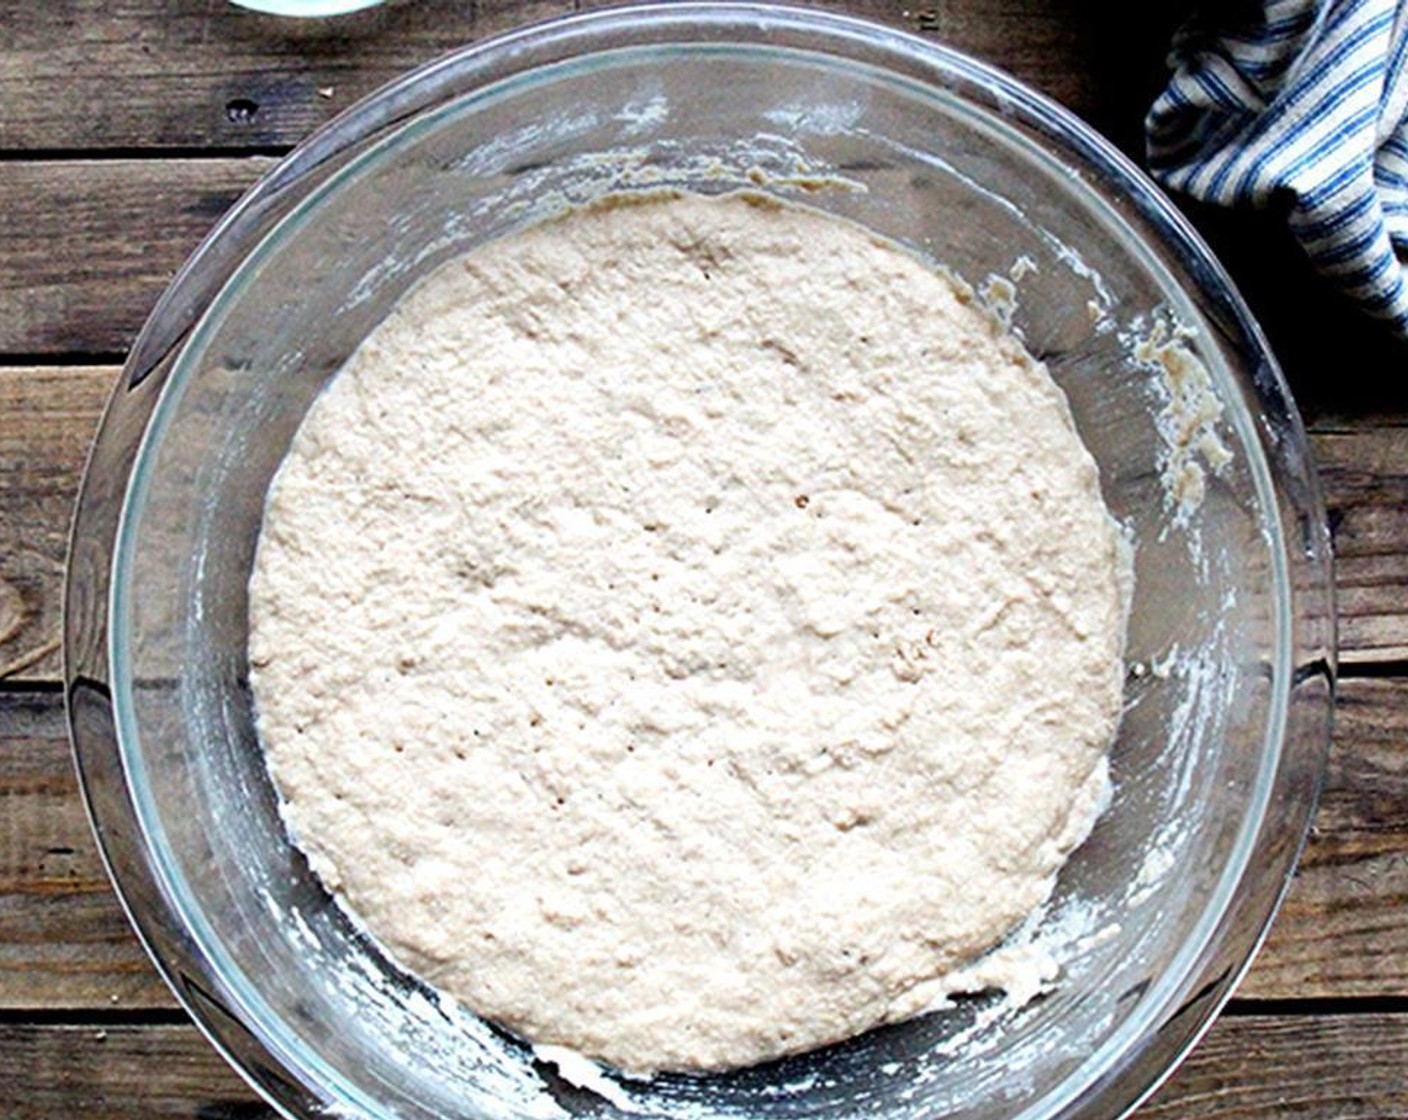 step 1 Whisk together White Whole Wheat Flour (2 2/3 cups), Kosher Salt (1 1/4 tsp) and Instant Dry Yeast (1/2 Tbsp). Add lukewarm Milk (1 1/2 cups), Honey (1 Tbsp) and Oil (1 Tbsp). Stir until combined. Cover bowl with tea towel or plastic wrap. Refrigerate overnight.